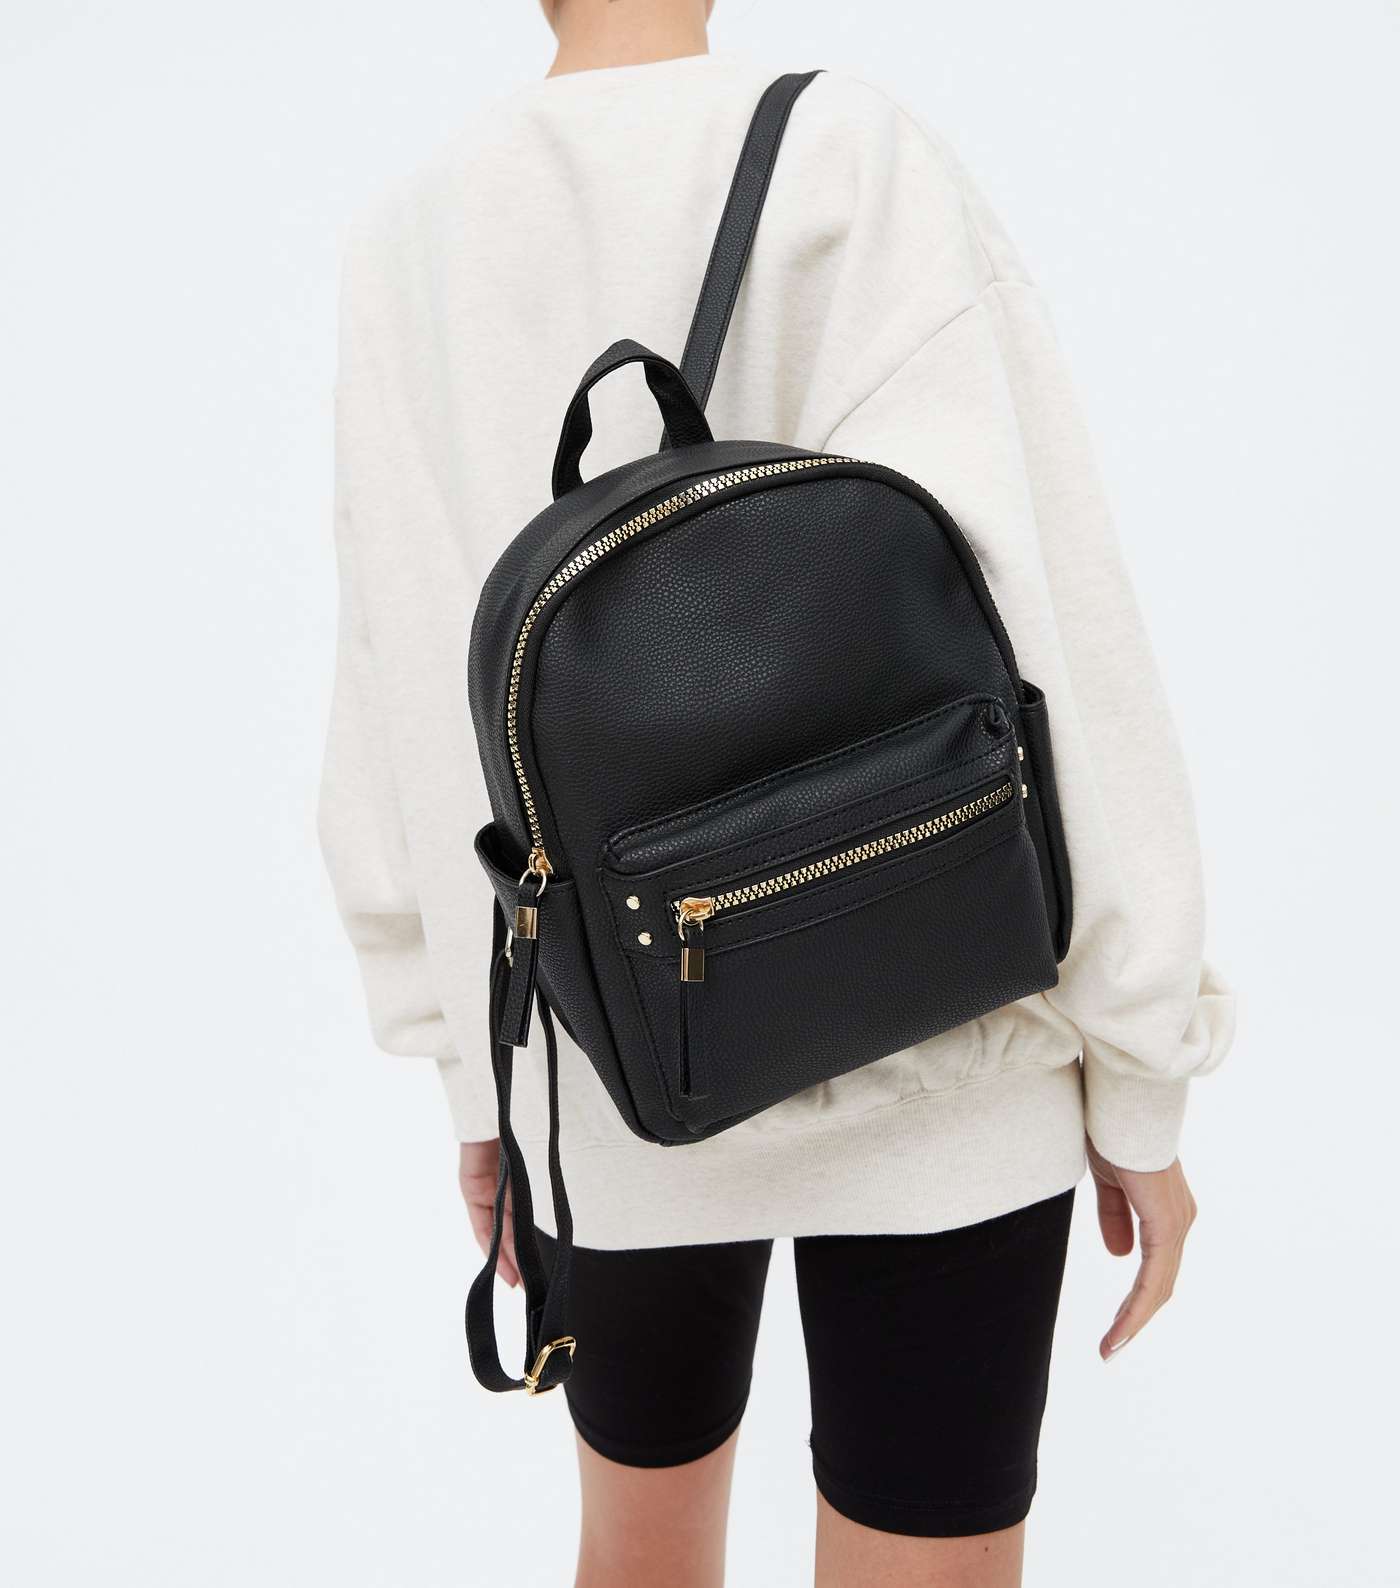 Black Leather-Look Zip Front Mini Backpack Image 2